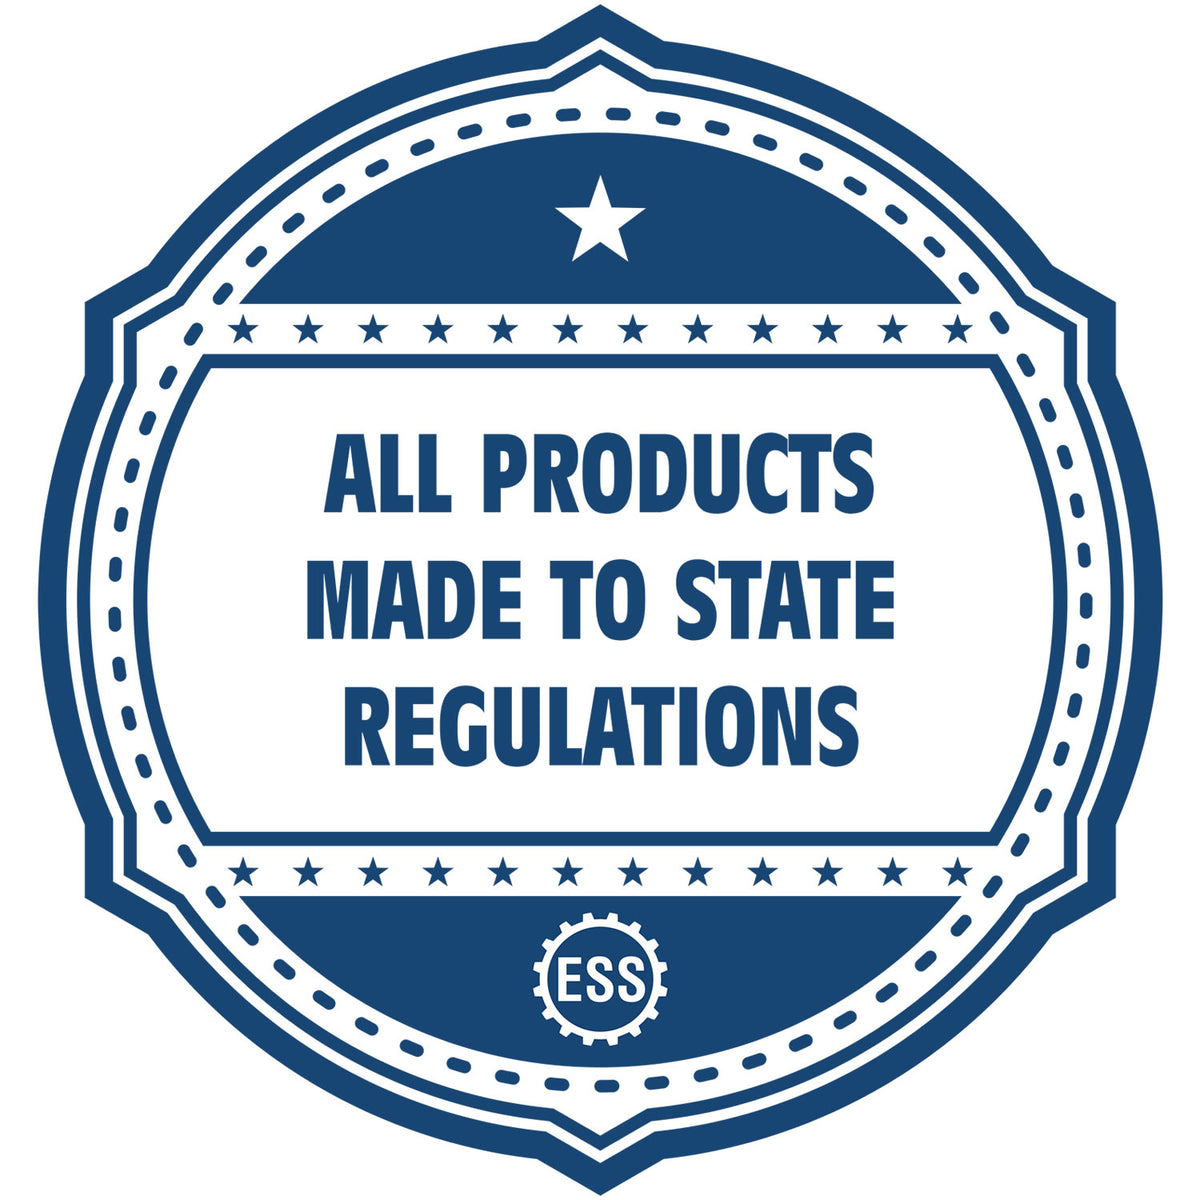 An icon or badge element for the Handheld Maine Professional Engineer Embosser showing that this product is made in compliance with state regulations.